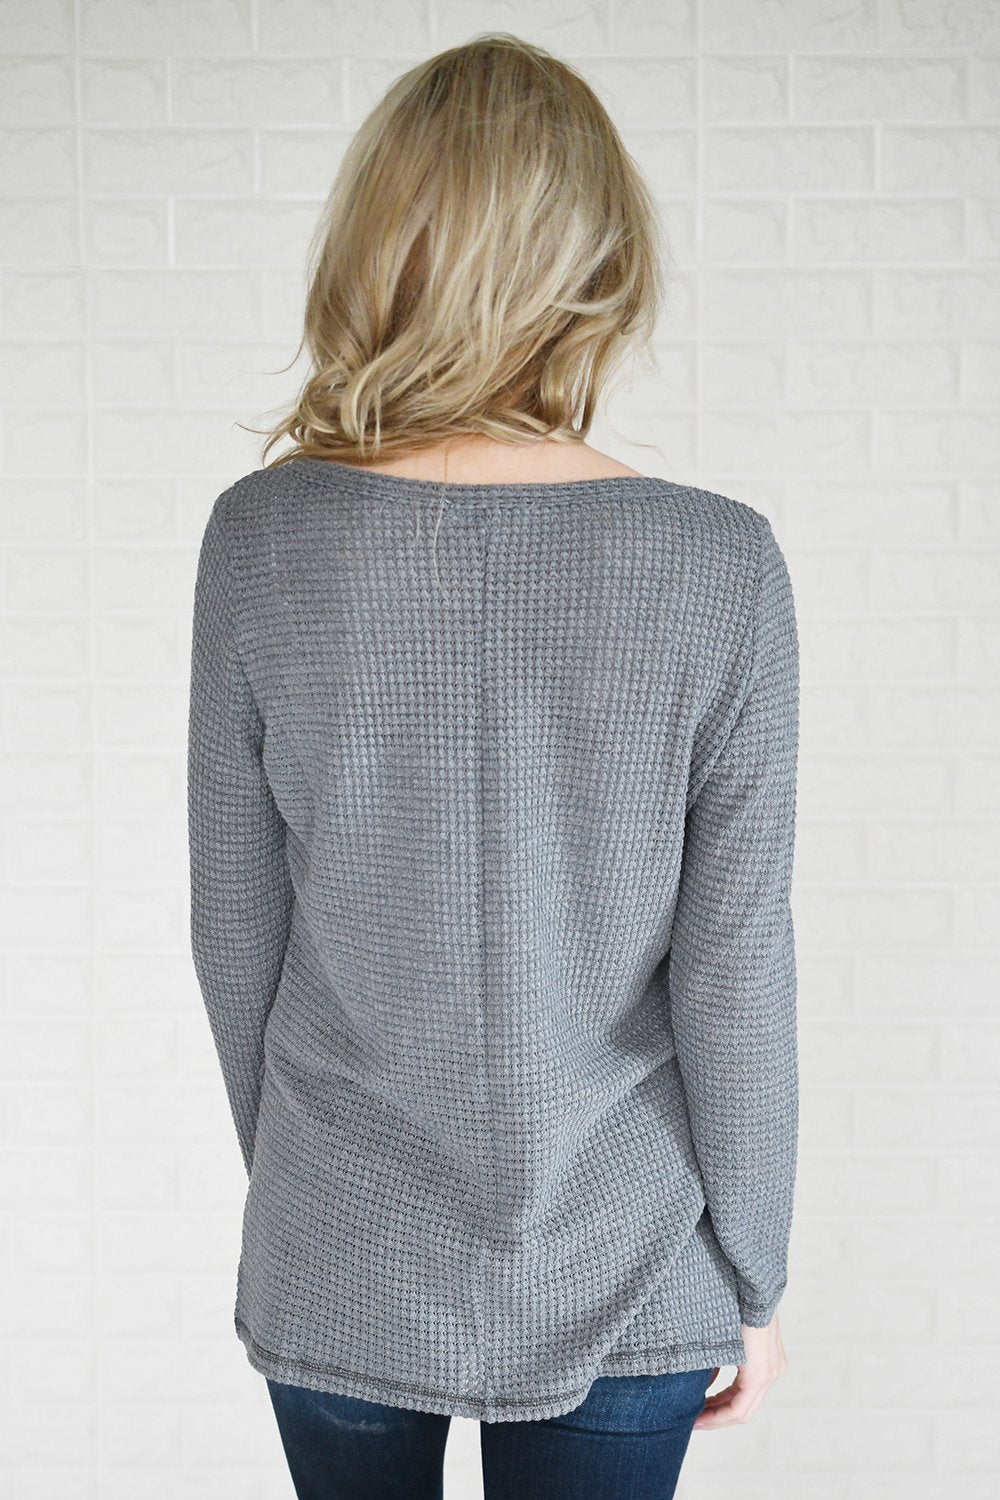 Soft Slate Blue Knit Thermal Top